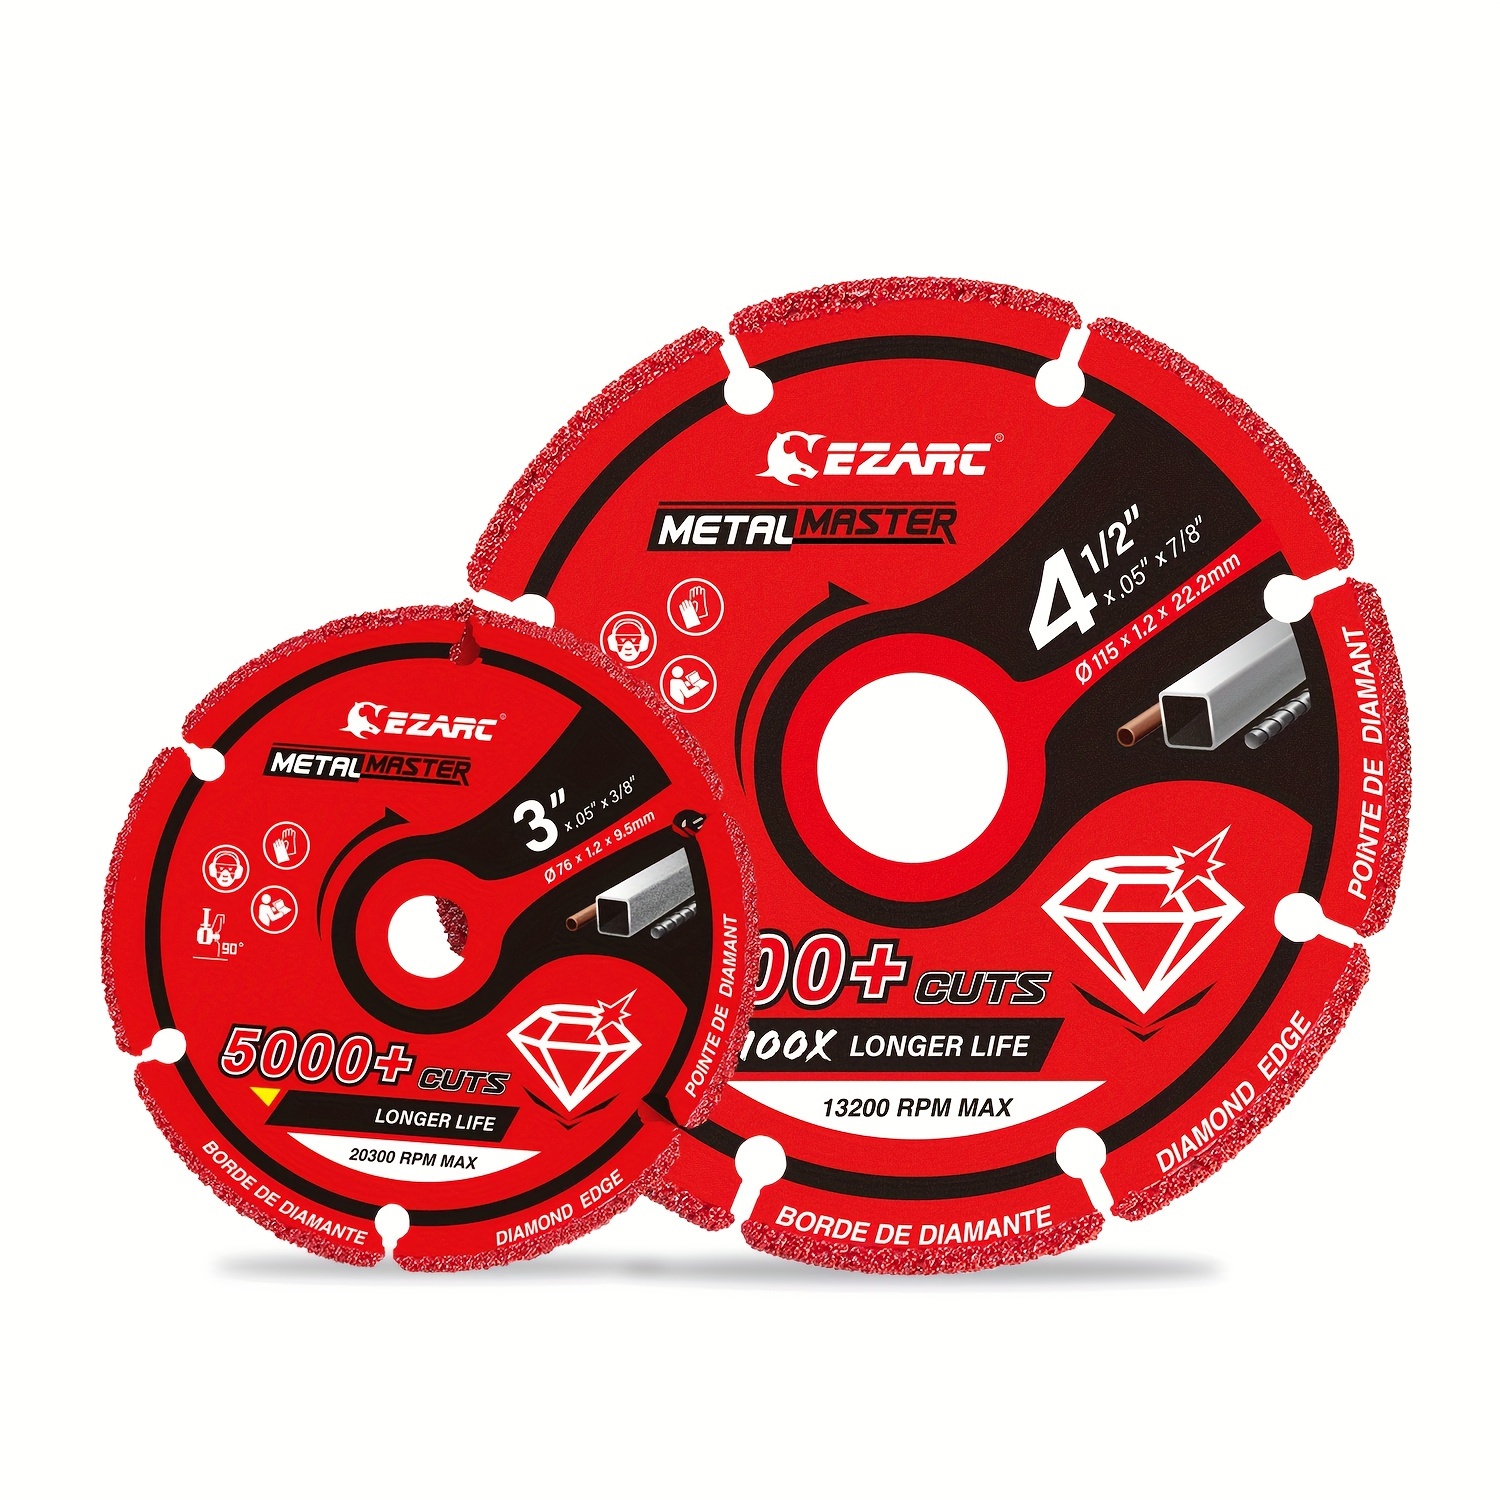 

Ezarc Metal Master 3" / 4.5" Diamond Cutting Wheel - 1pc, 5000+ Cuts, Accurate, 100x Longer Life, Suitable For Metals, , Steel, Iron, And Stainless Steel